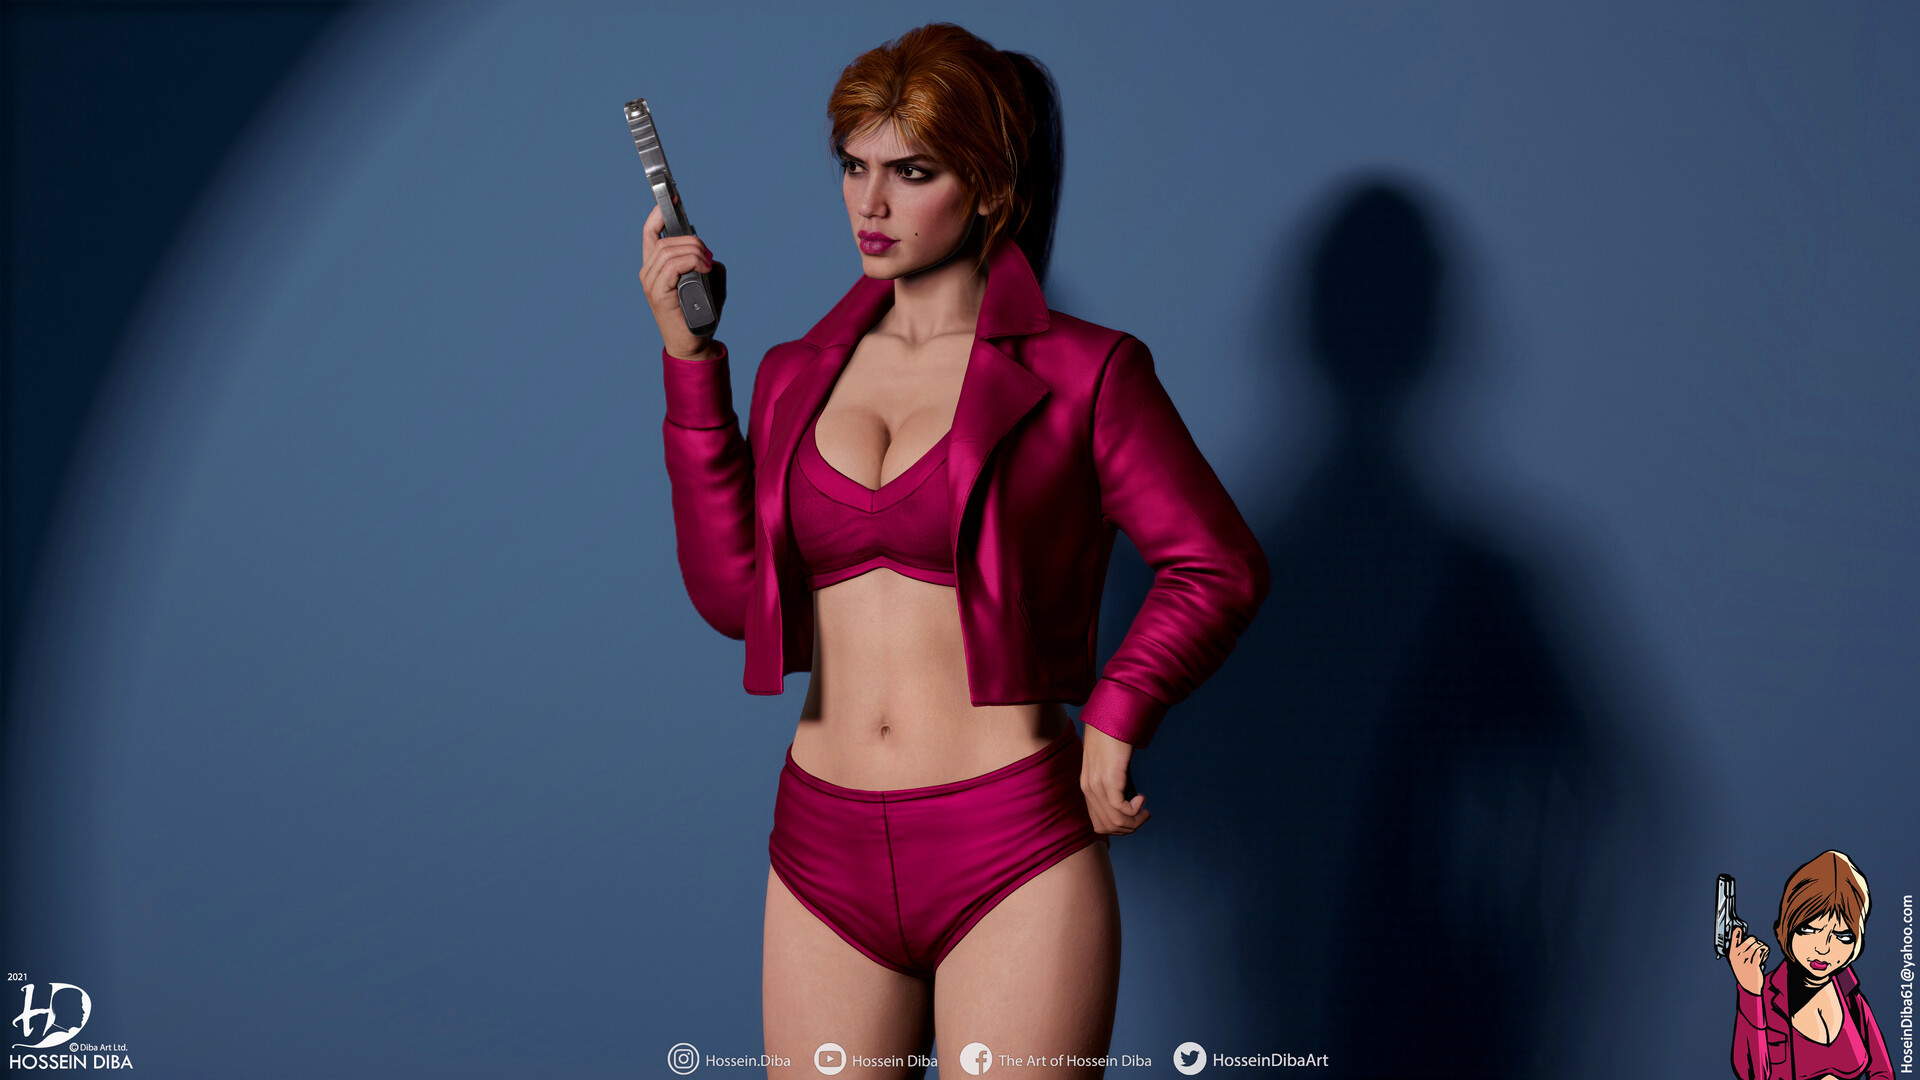 Here is my take on the cover girl from GTA III, Misty. https://www.linkedin...